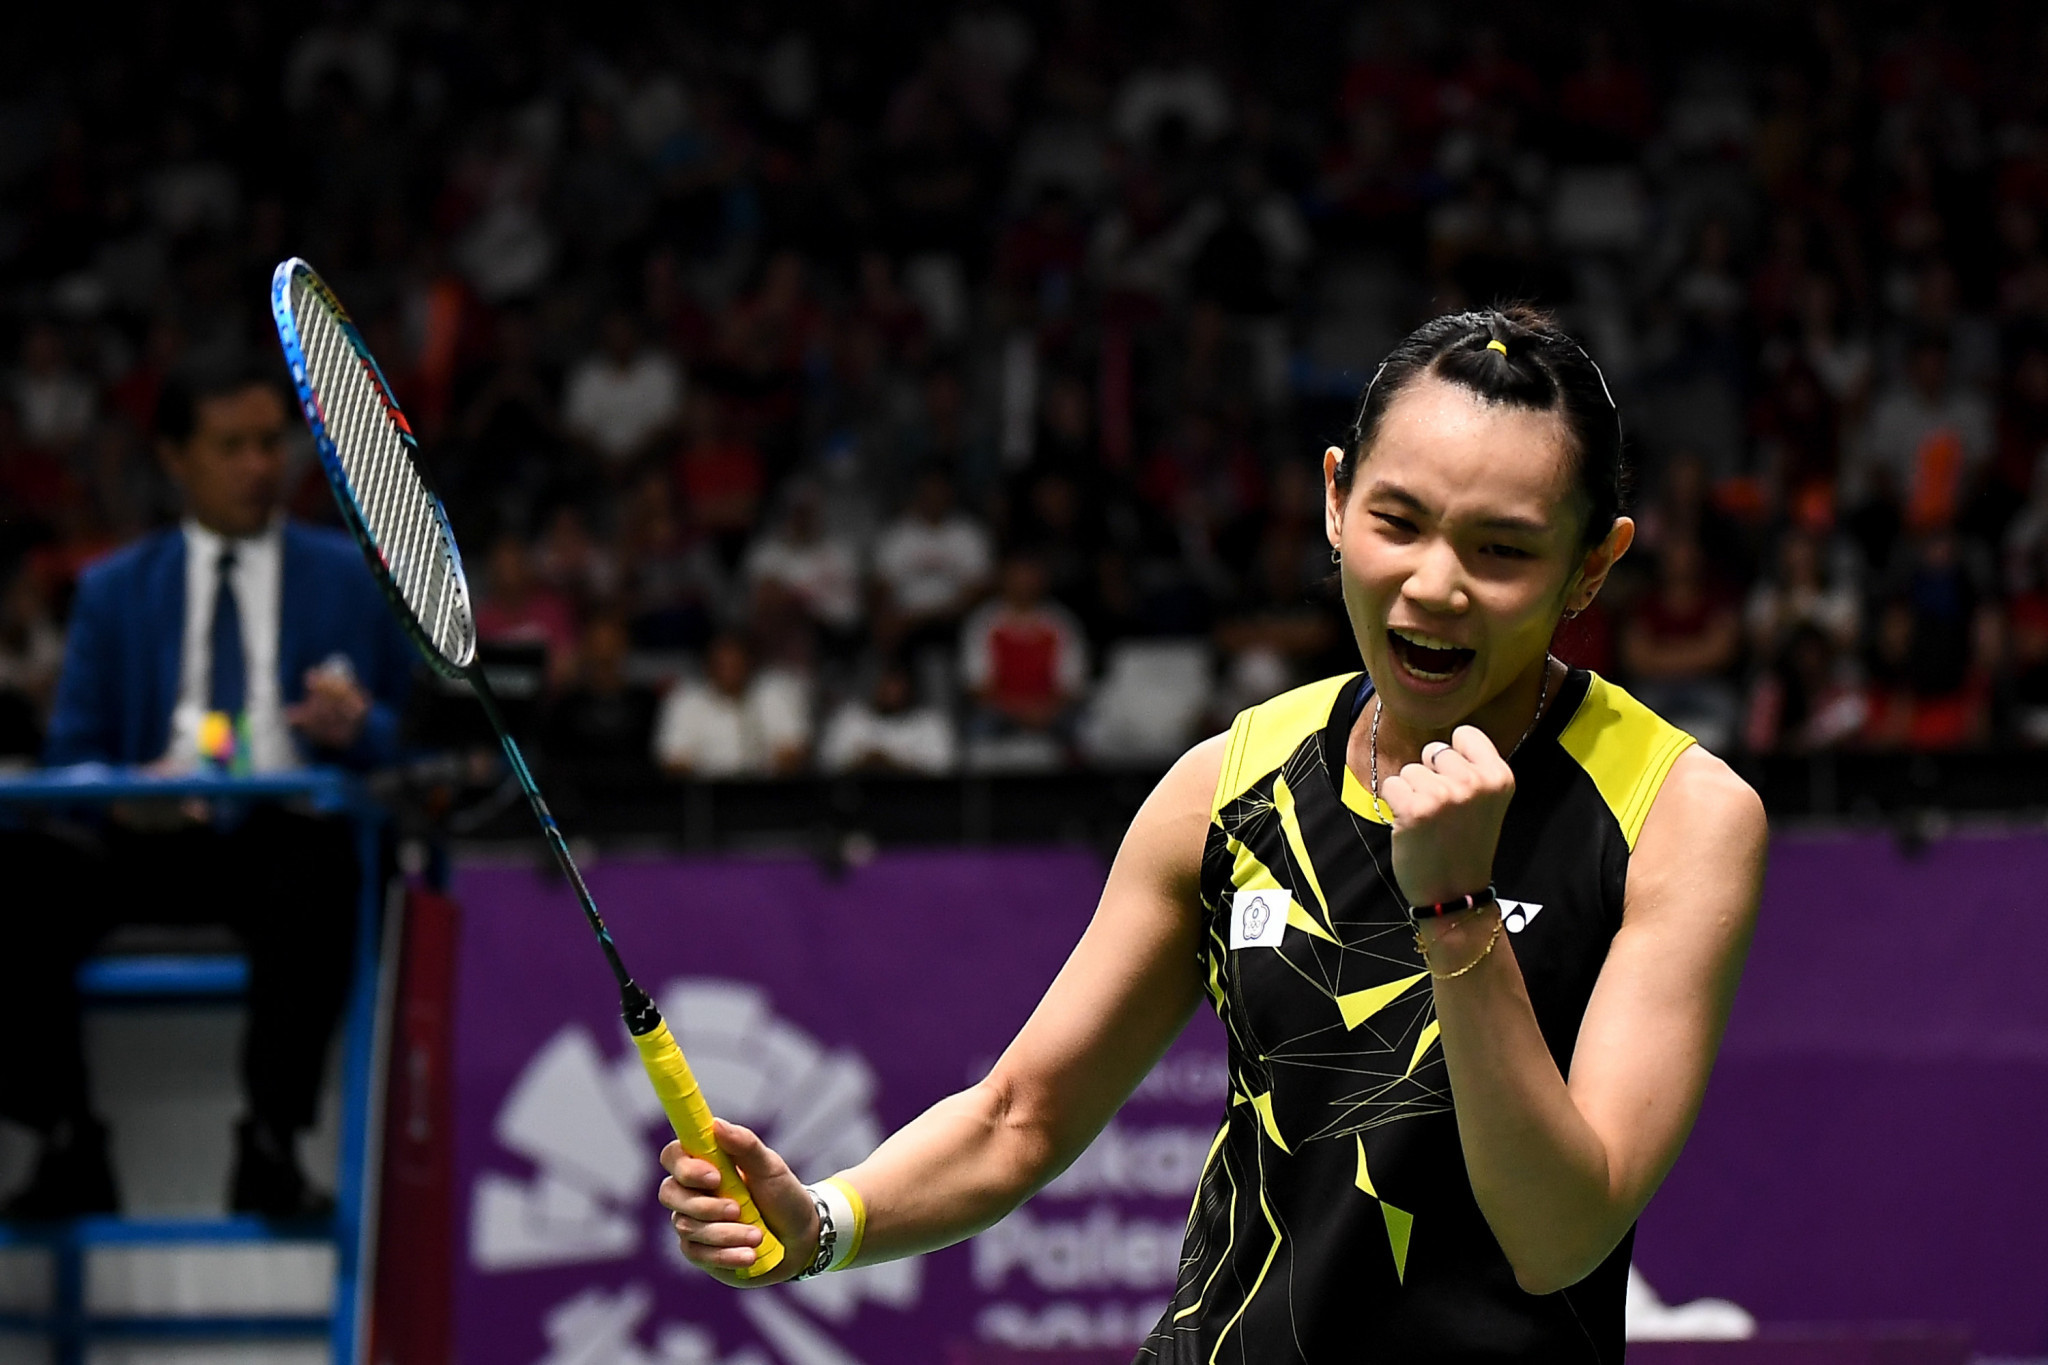 Chinese Taipei's Tai Tzu-ying will be looking to continue her successful 2018 season and maintain her world number one spot at the BWF French Open in Paris having won the Denmark Open in Odense ©Getty Images